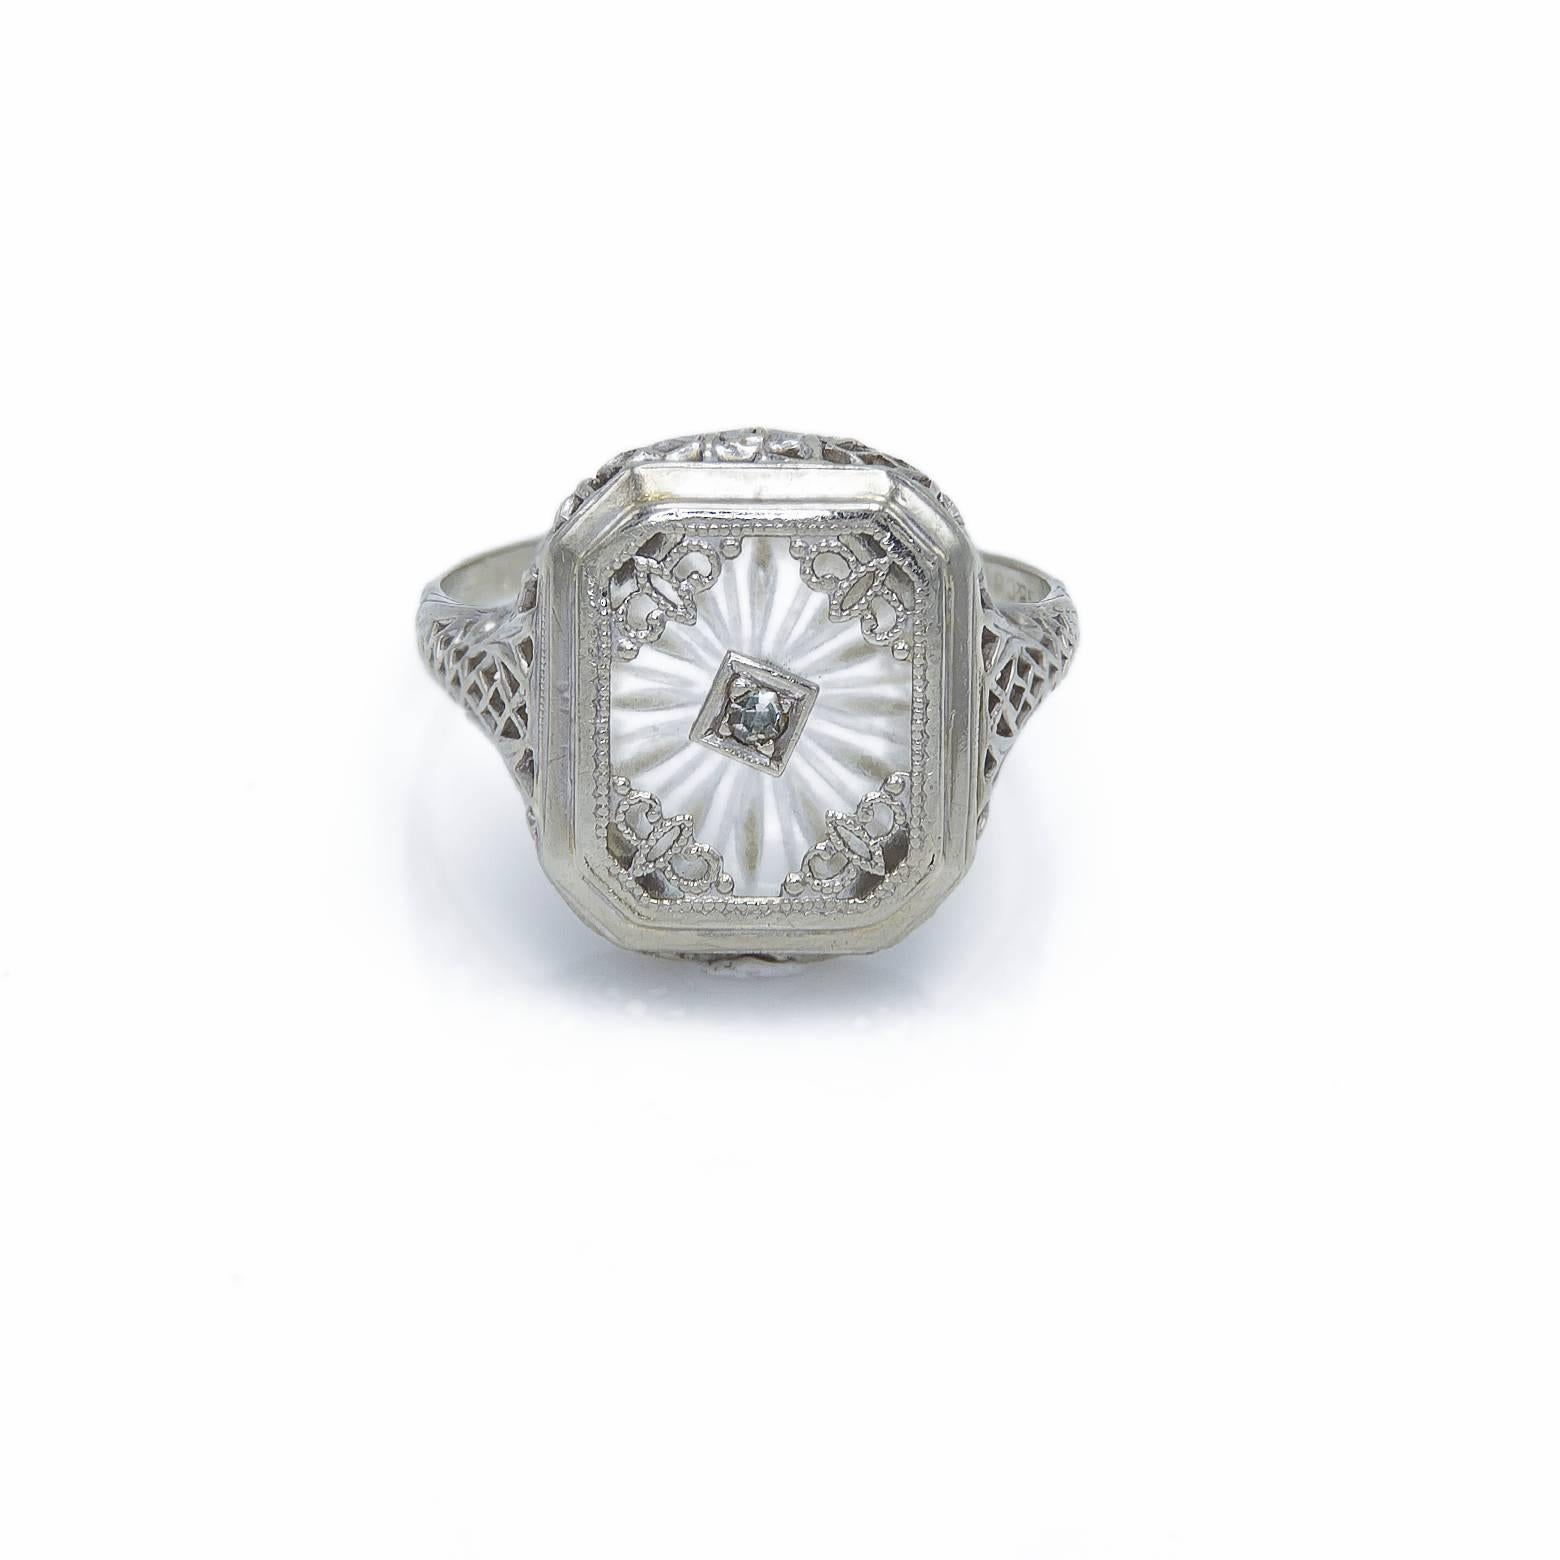 This gorgeous and detailed diamond ring has a beautiful backdrop of a ray crystal star burst in the backround. The hand detailed intricate filigree bezel is clearly exquisite with flowers in the design and looks as if it were found in the best